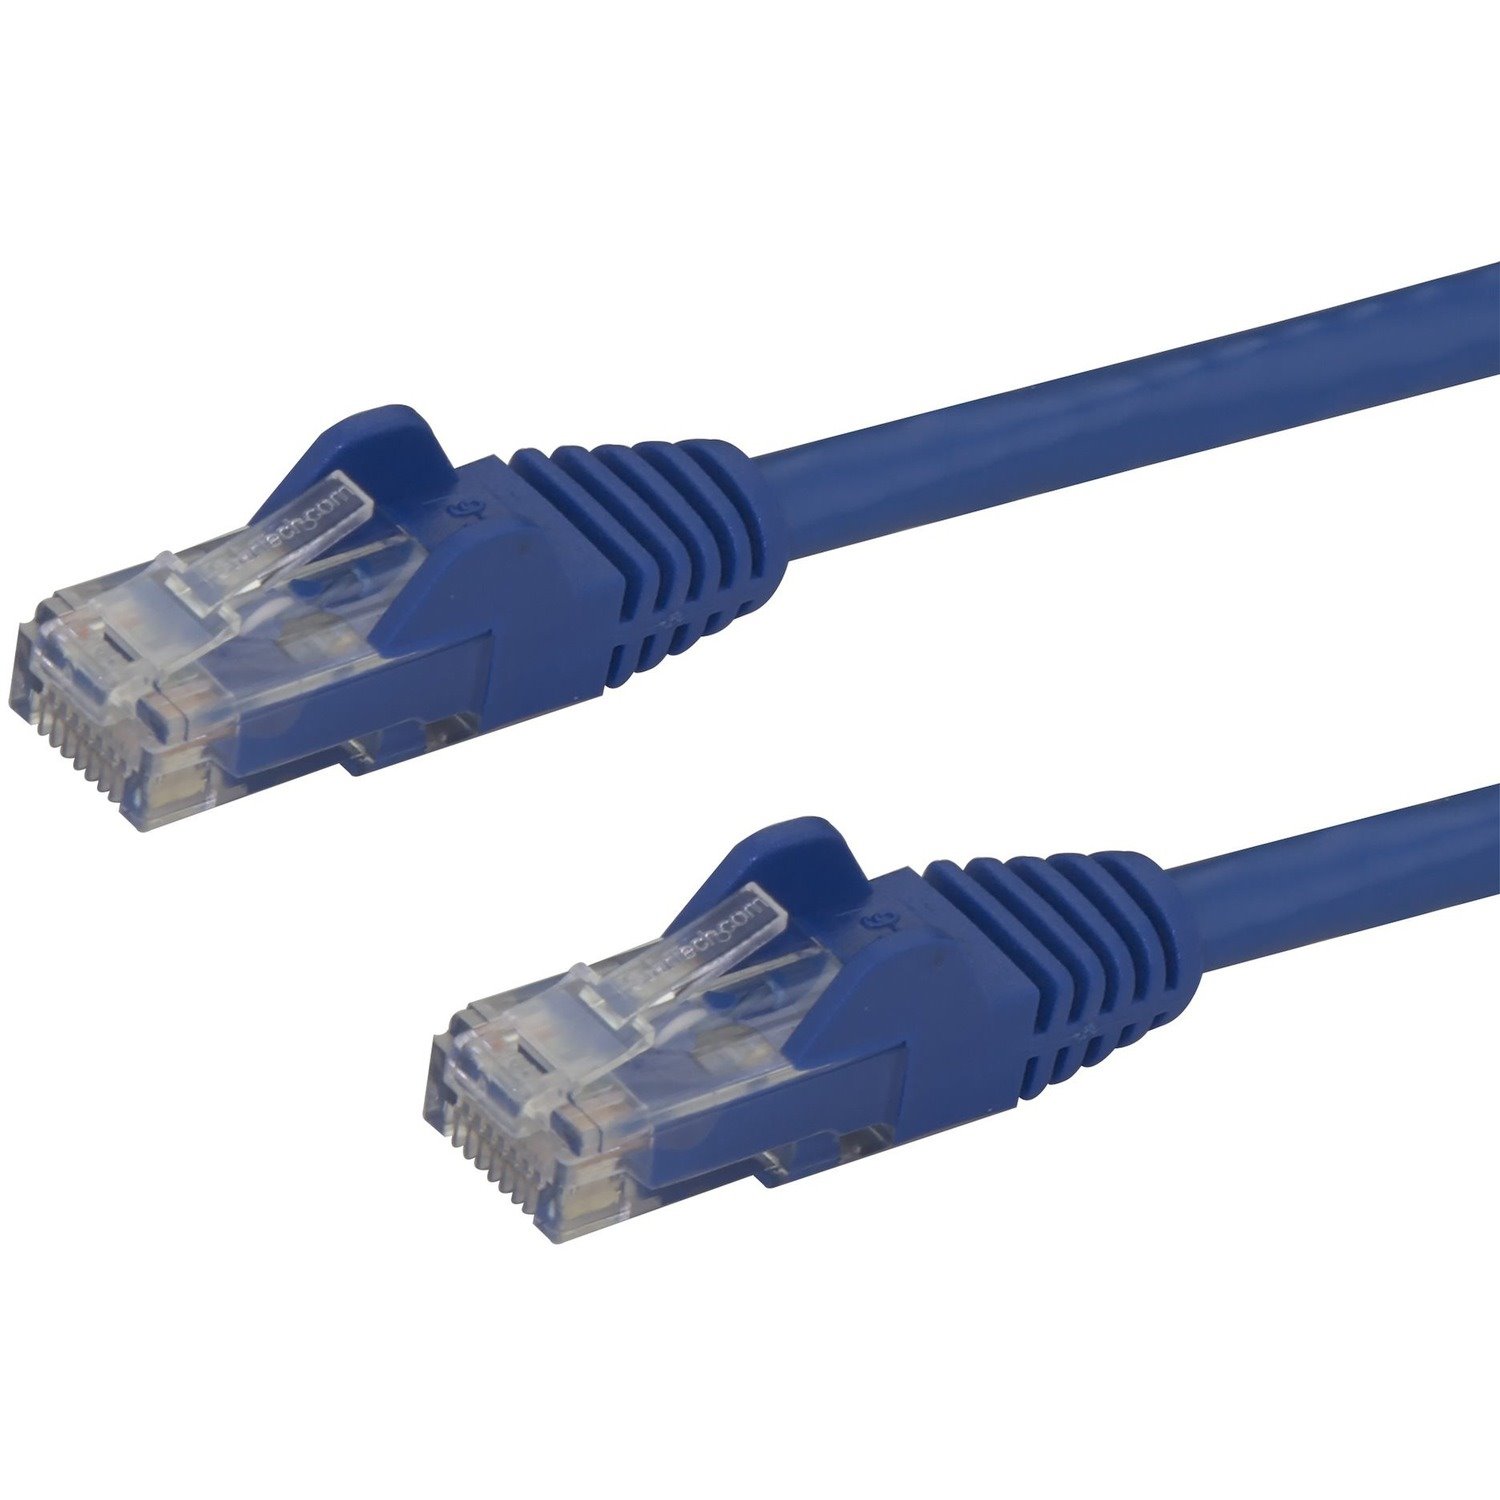 StarTech.com 150ft CAT6 Ethernet Cable - Blue Snagless Gigabit - 100W PoE UTP 650MHz Category 6 Patch Cord UL Certified Wiring/TIA